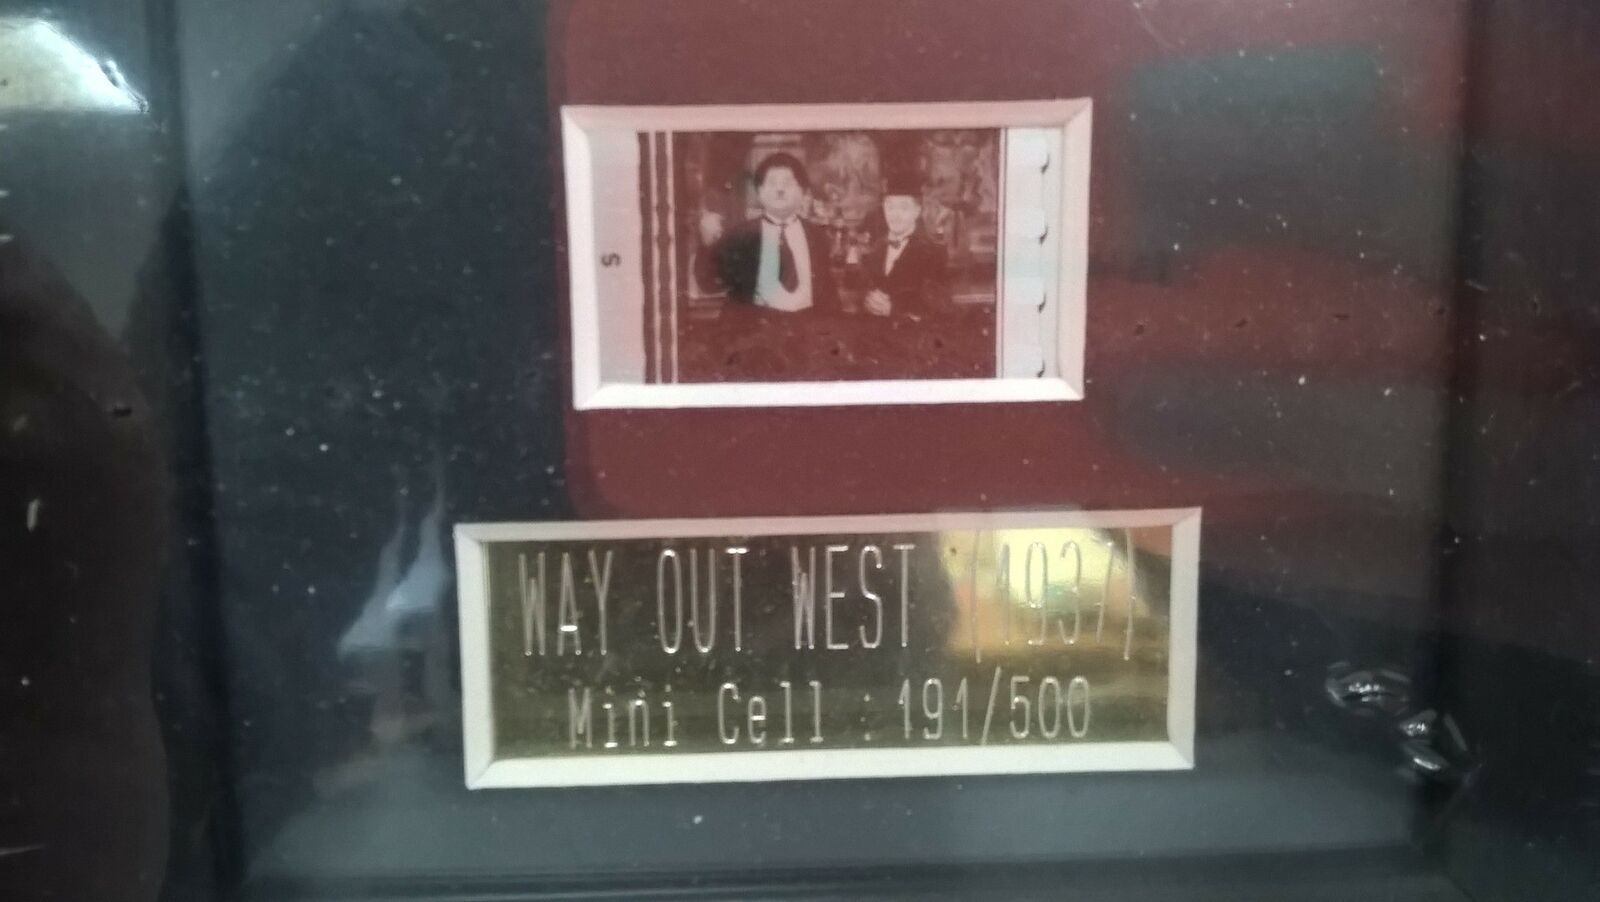 Laurel & Hardy Film Cell Memorabilia Way Out West - Image 4 of 6